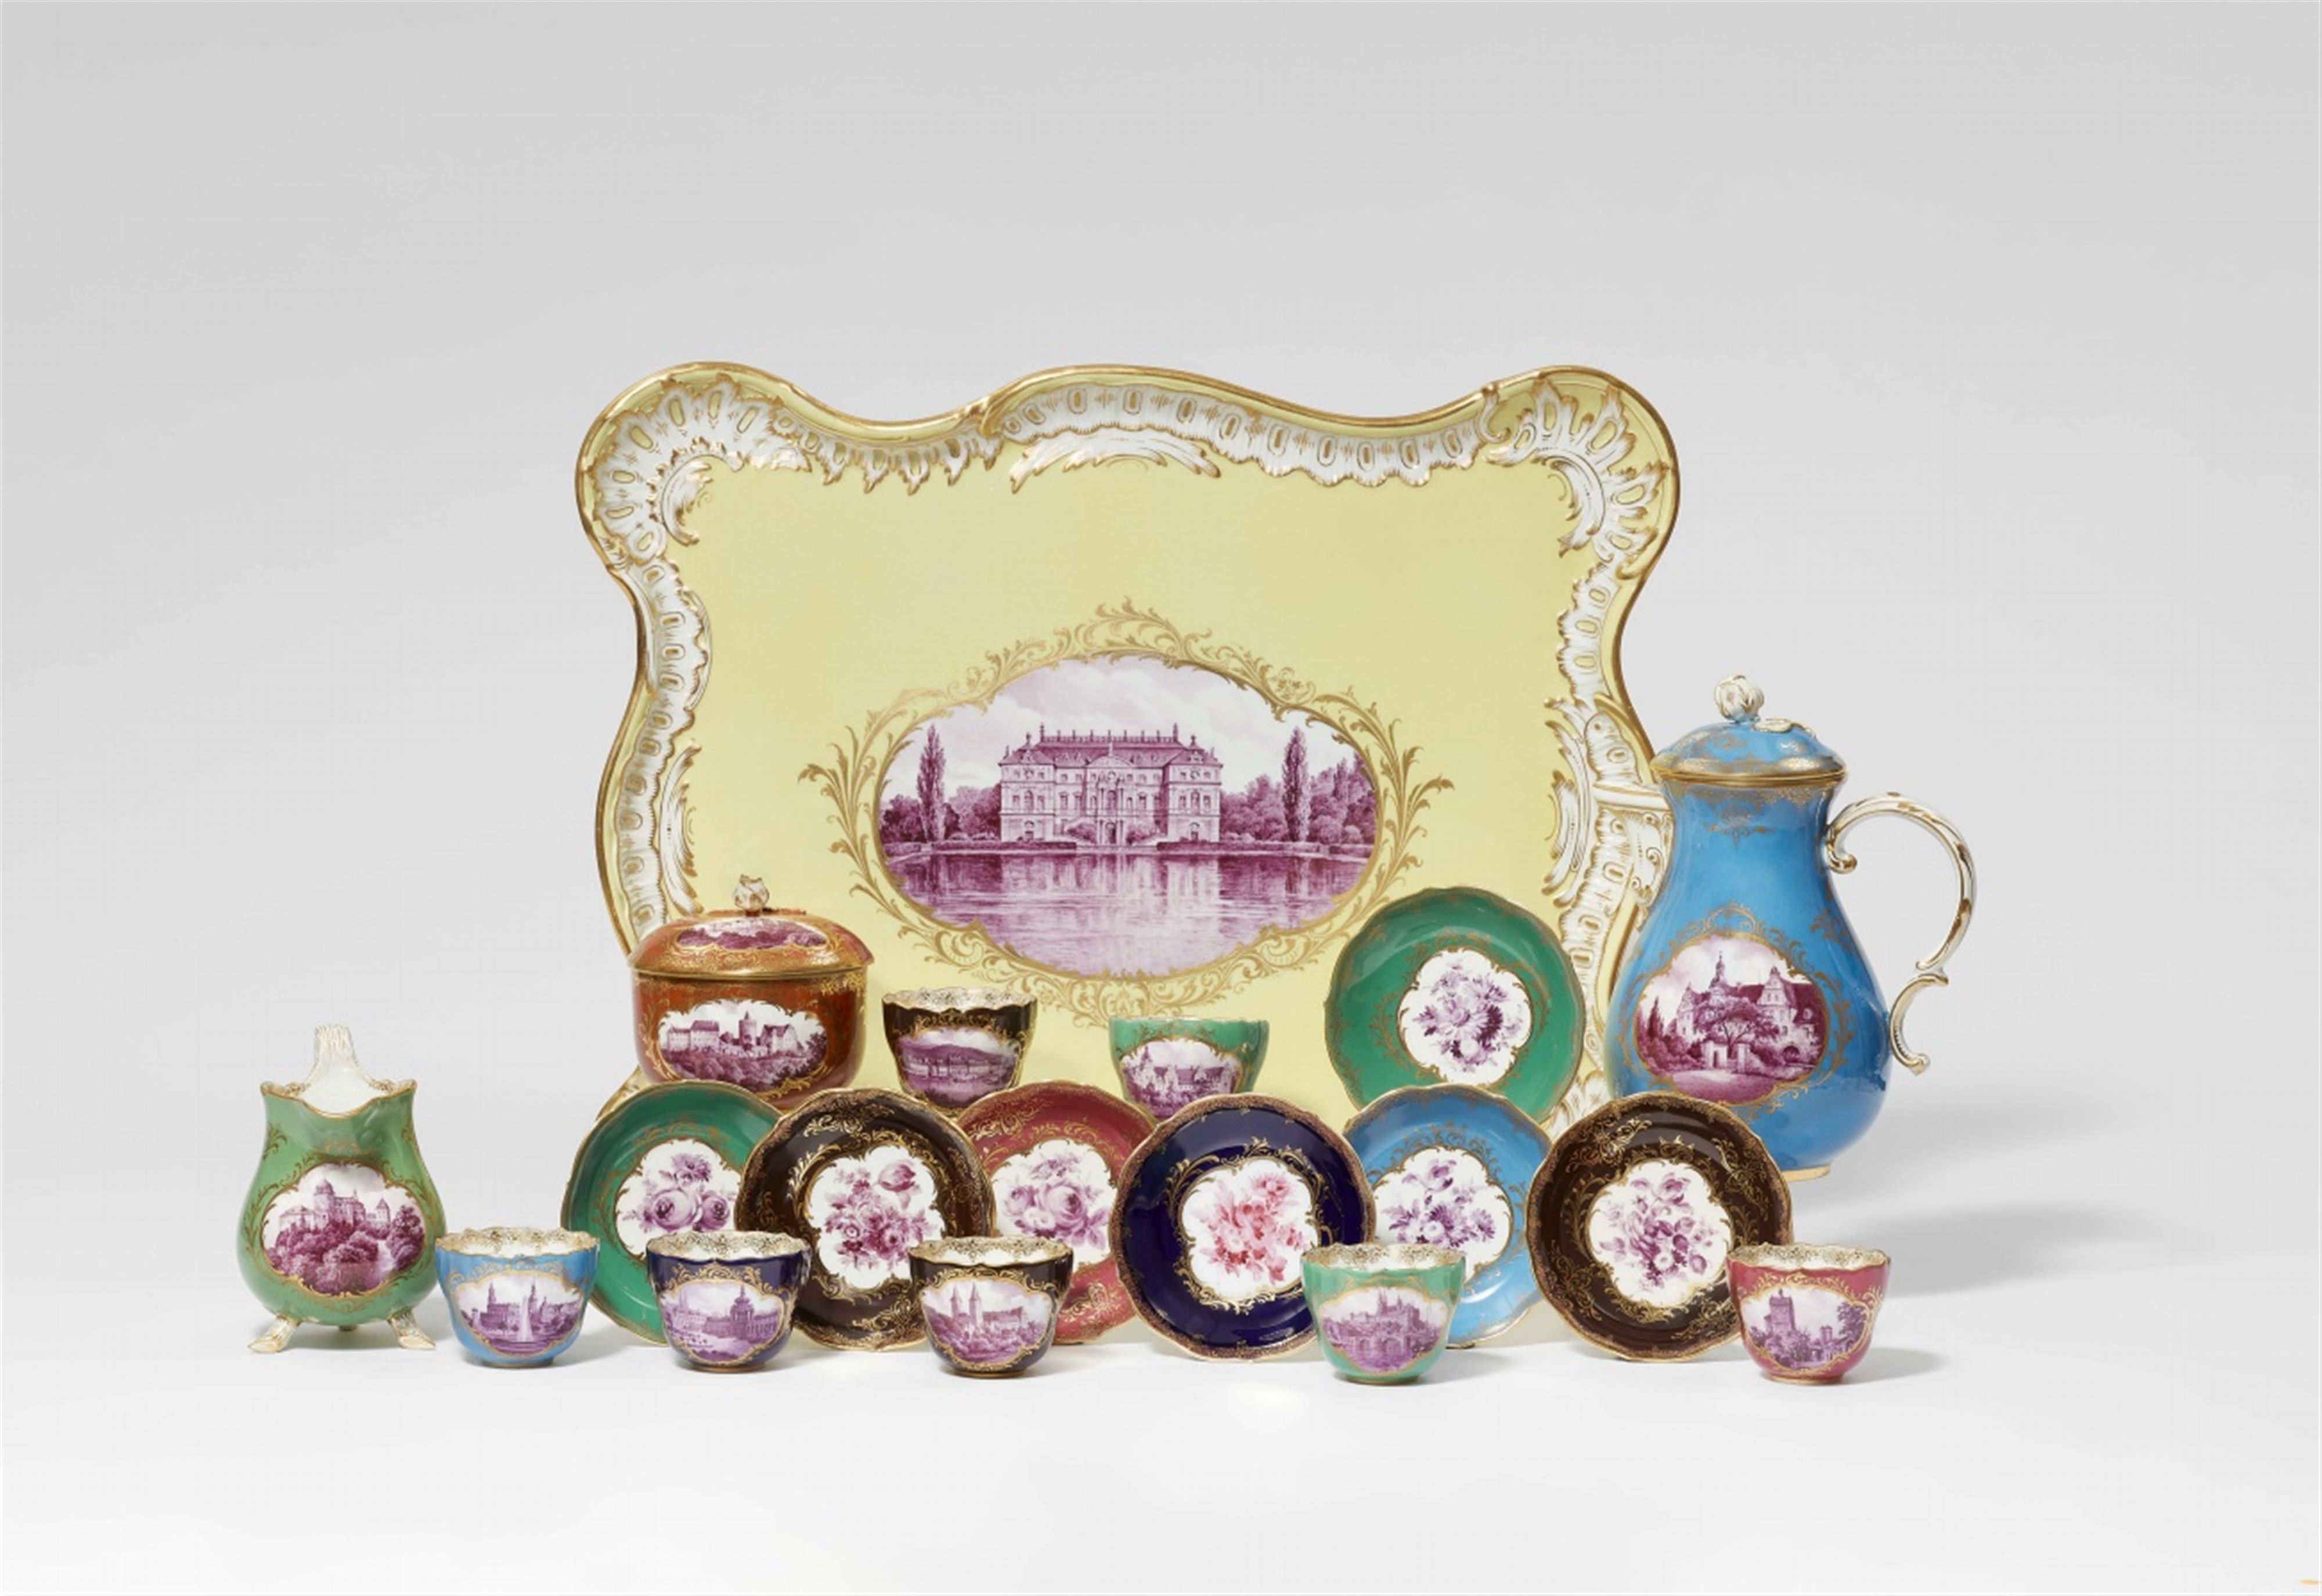 An unusual Meissen porcelain service with palaces in Saxony - image-1